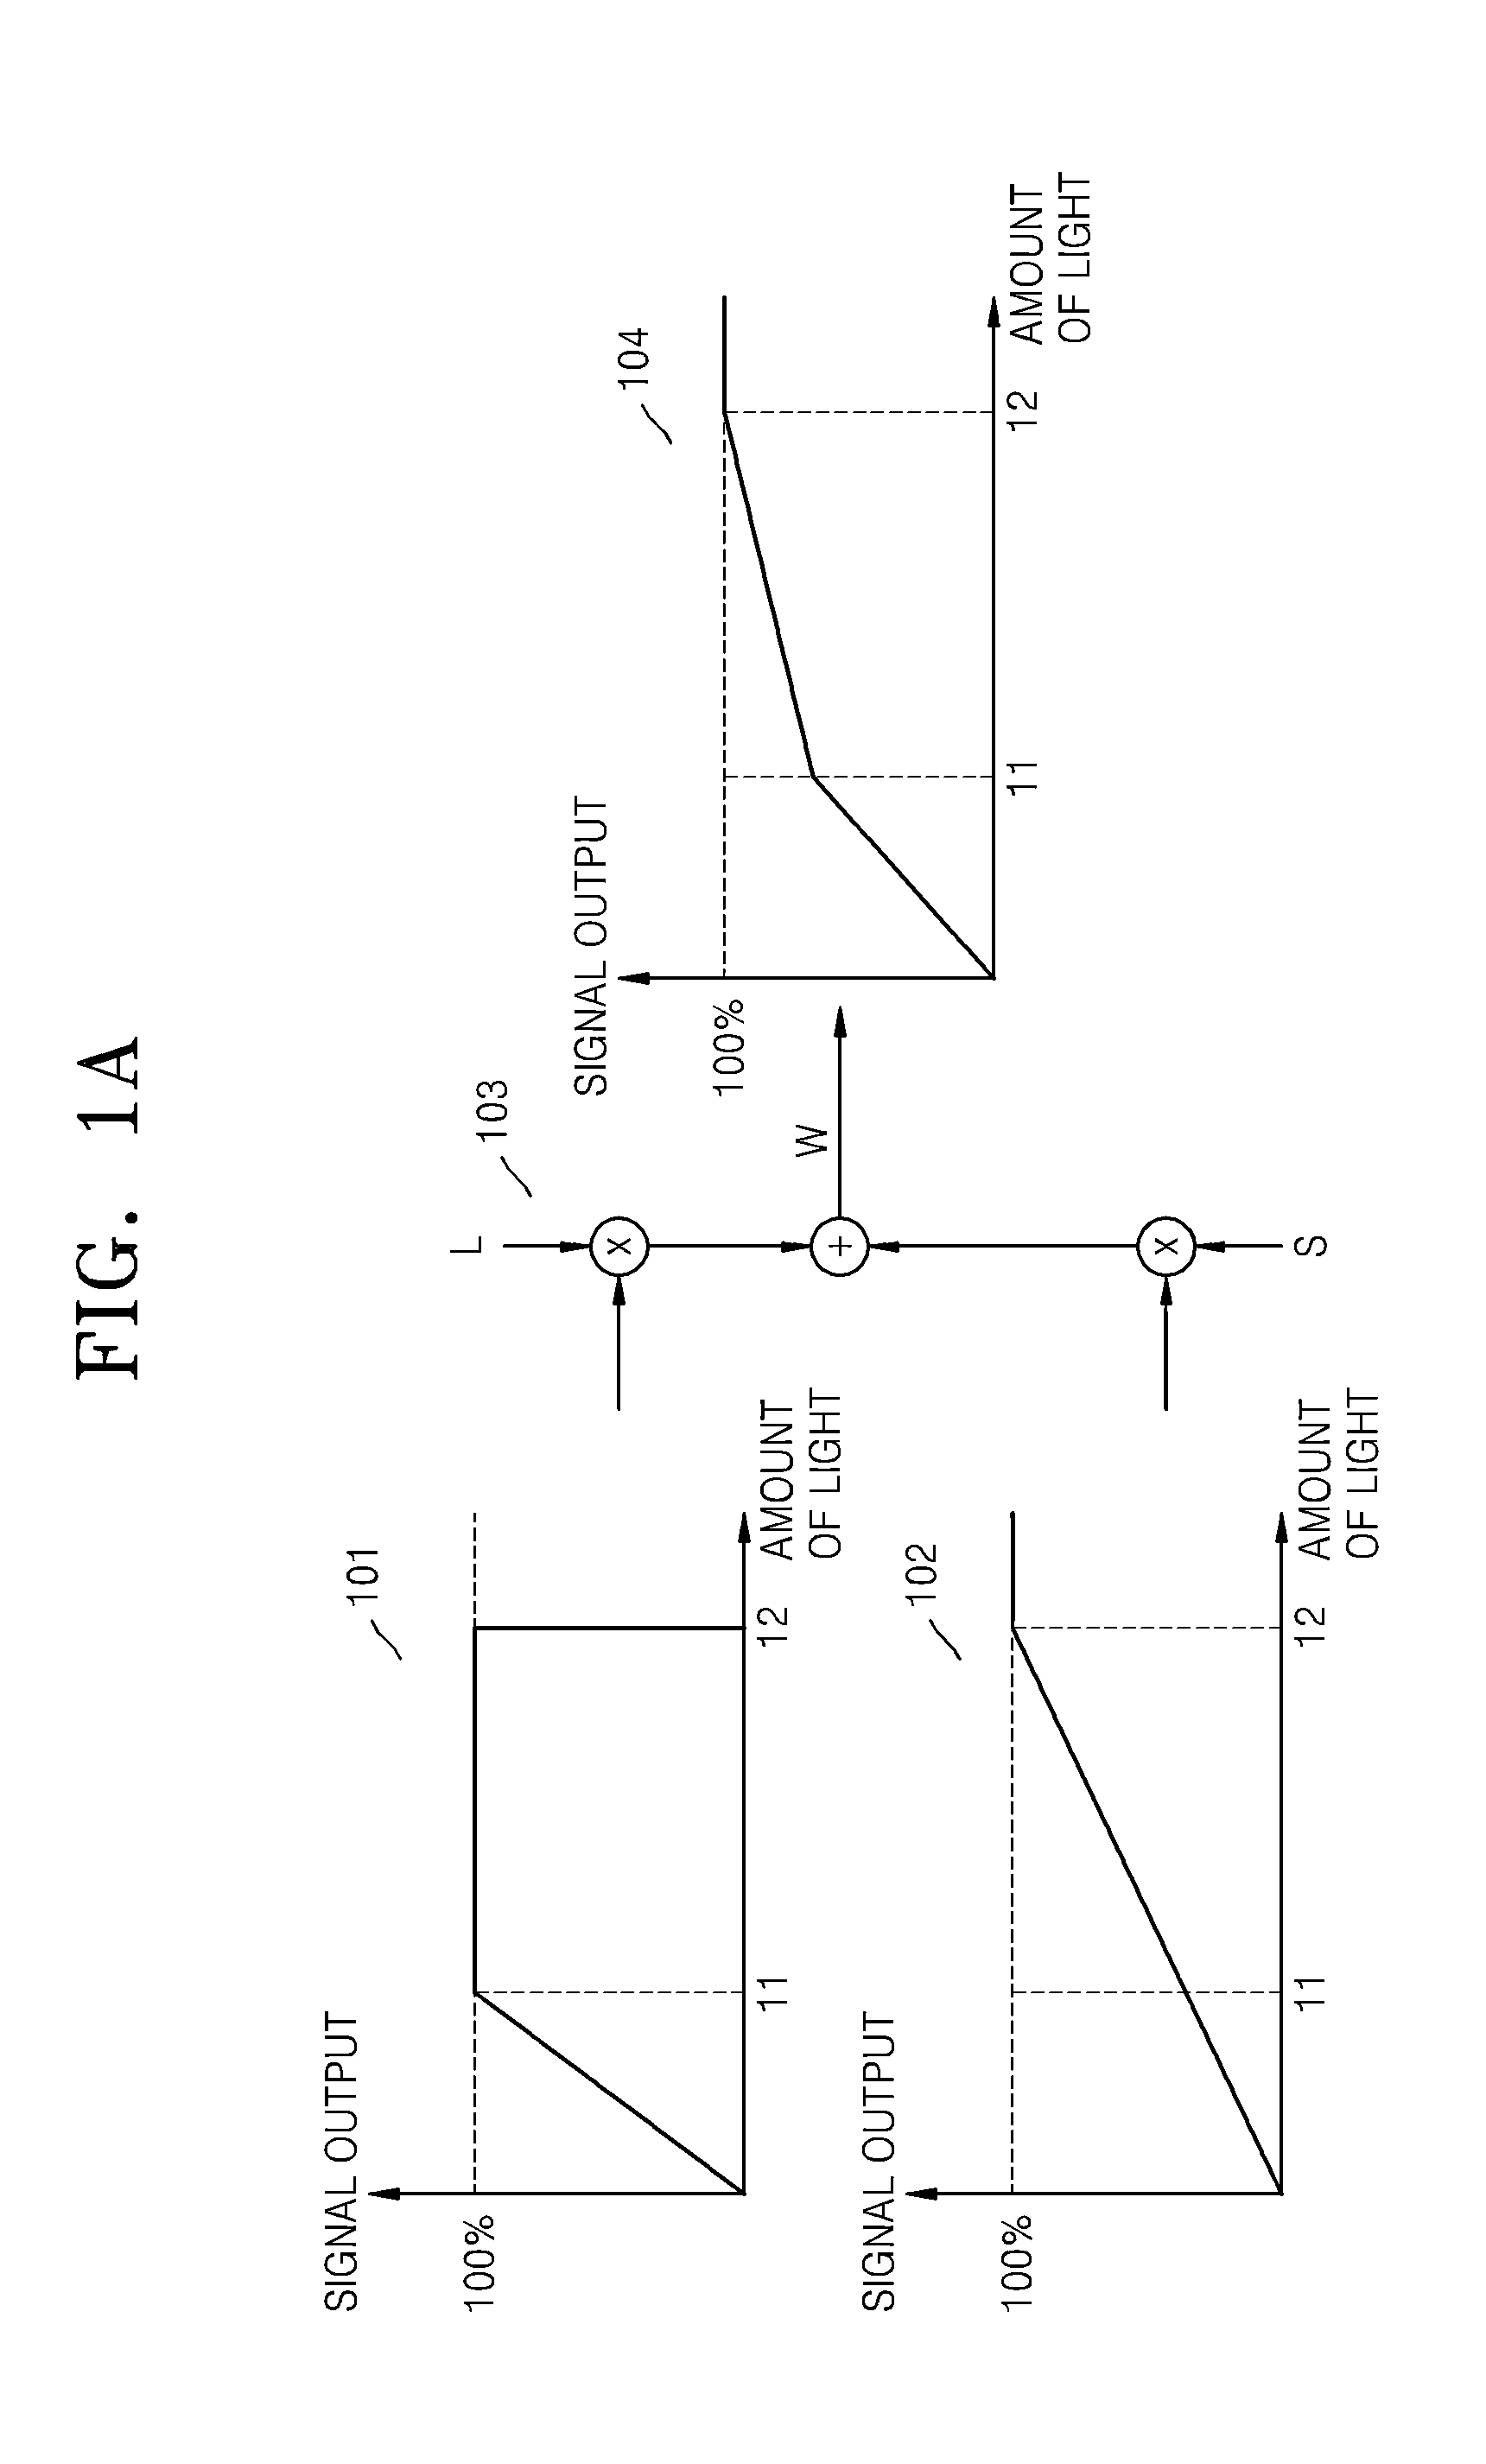 Apparatus and method for processing image